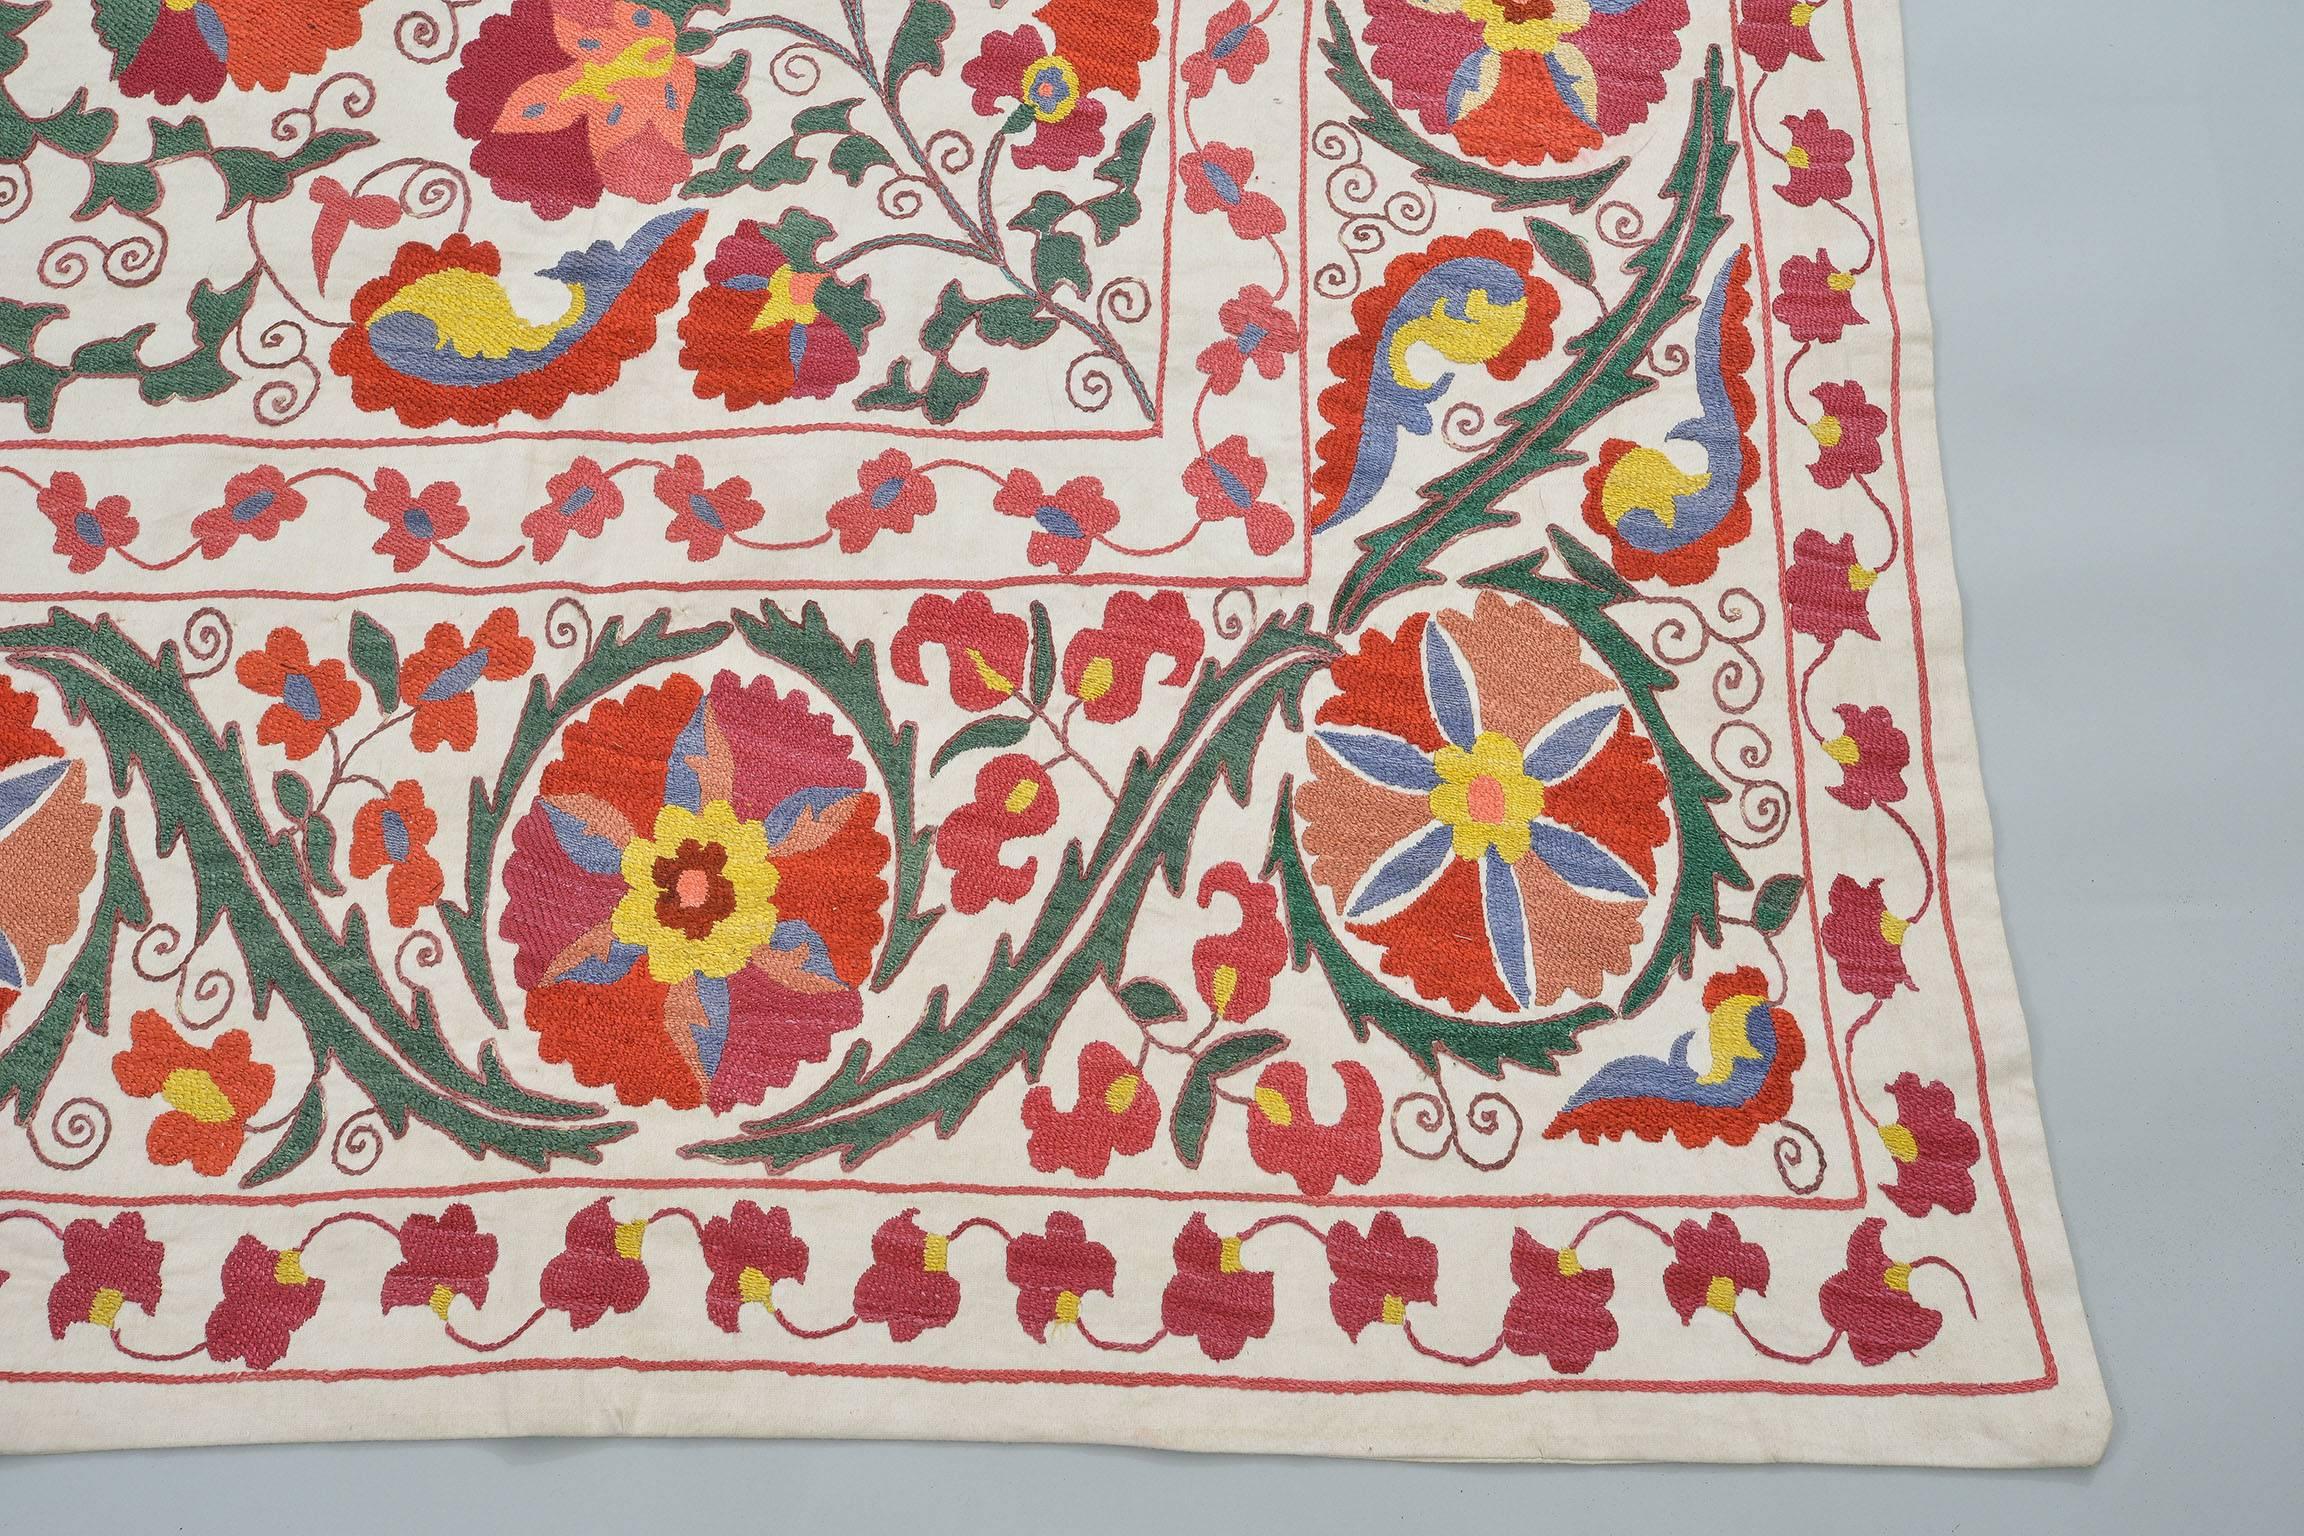 Folk Art Susani Embroidery, Wall Hanging or Bed Cover or Table Cover For Sale